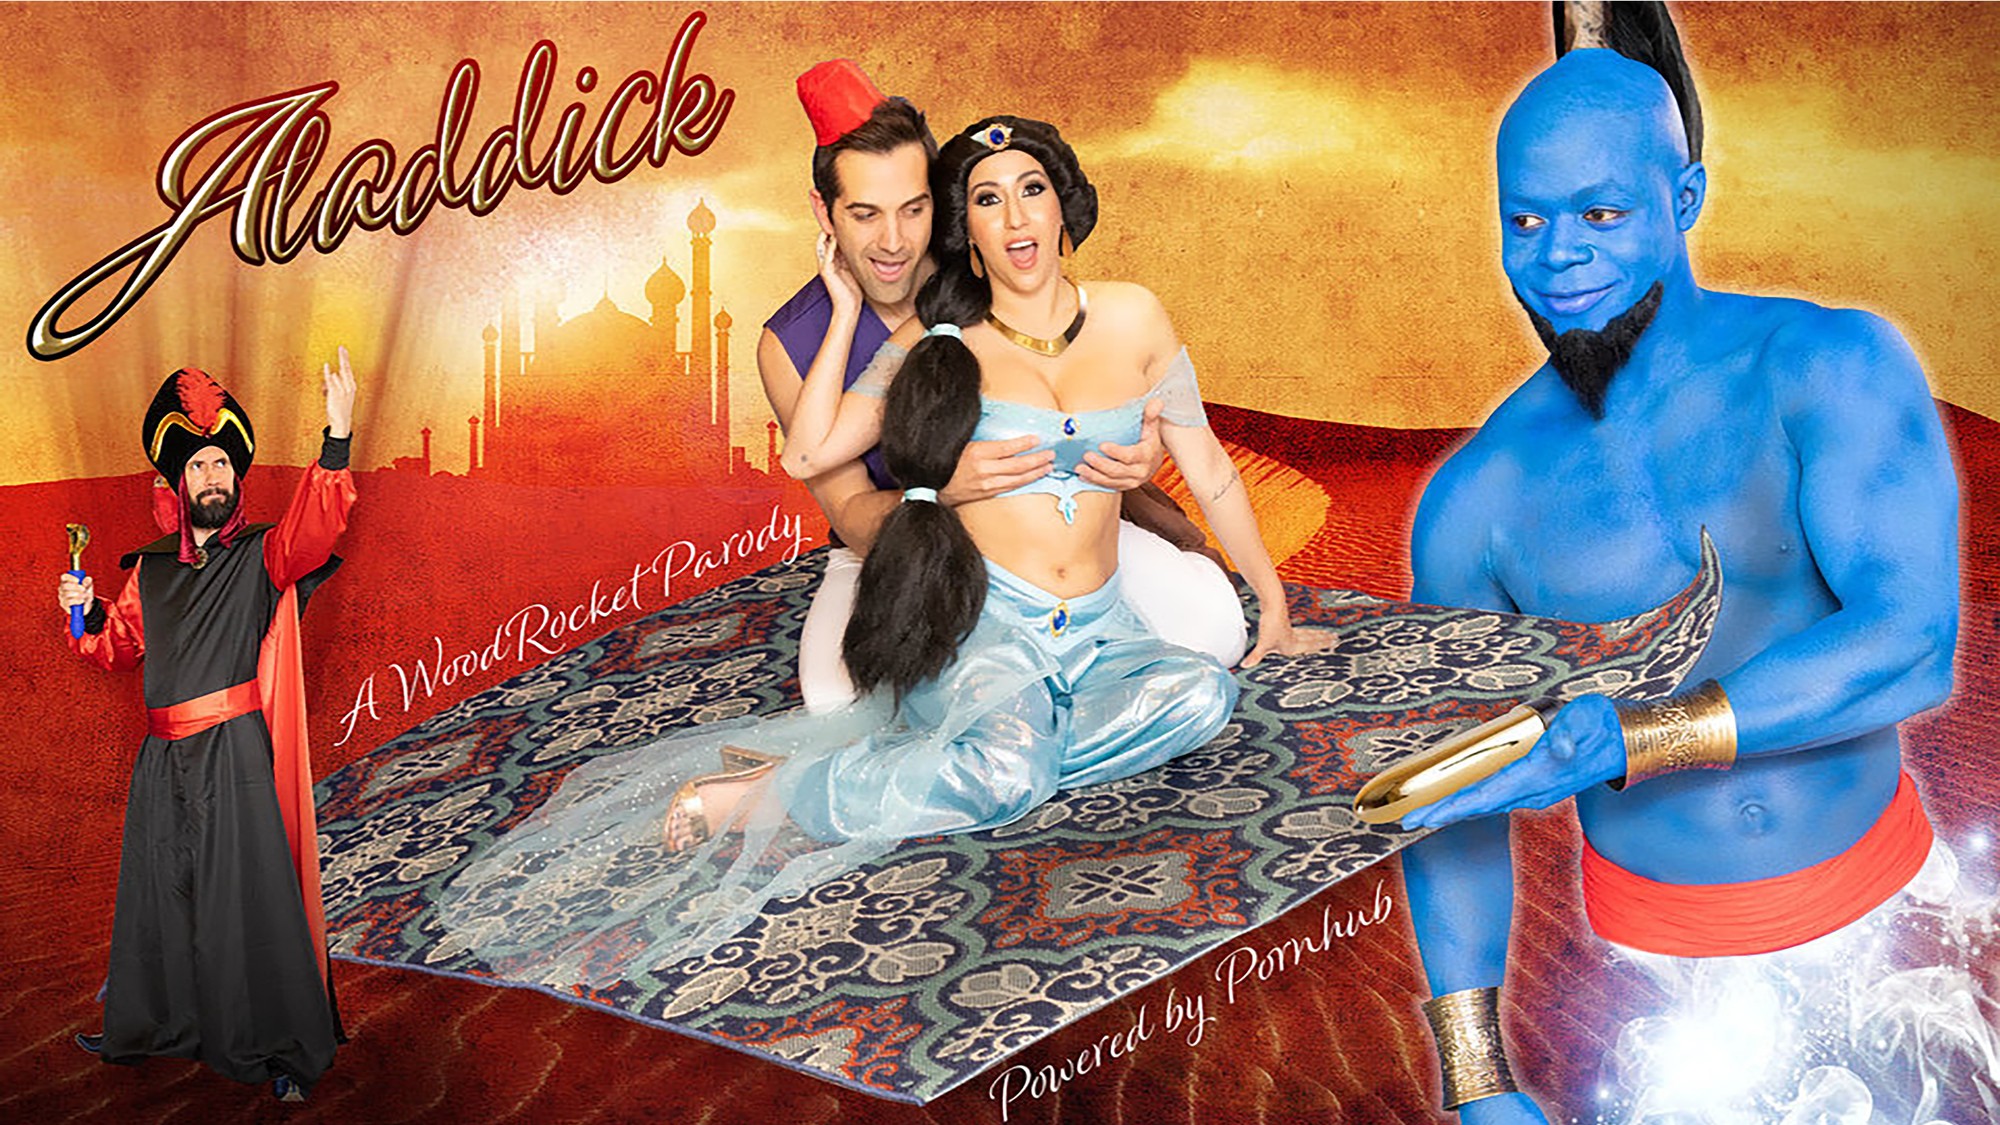 Full Porn Parodies - The 'Aladdin' Porn Parody Is Here and We Fixed Its Title - VICE